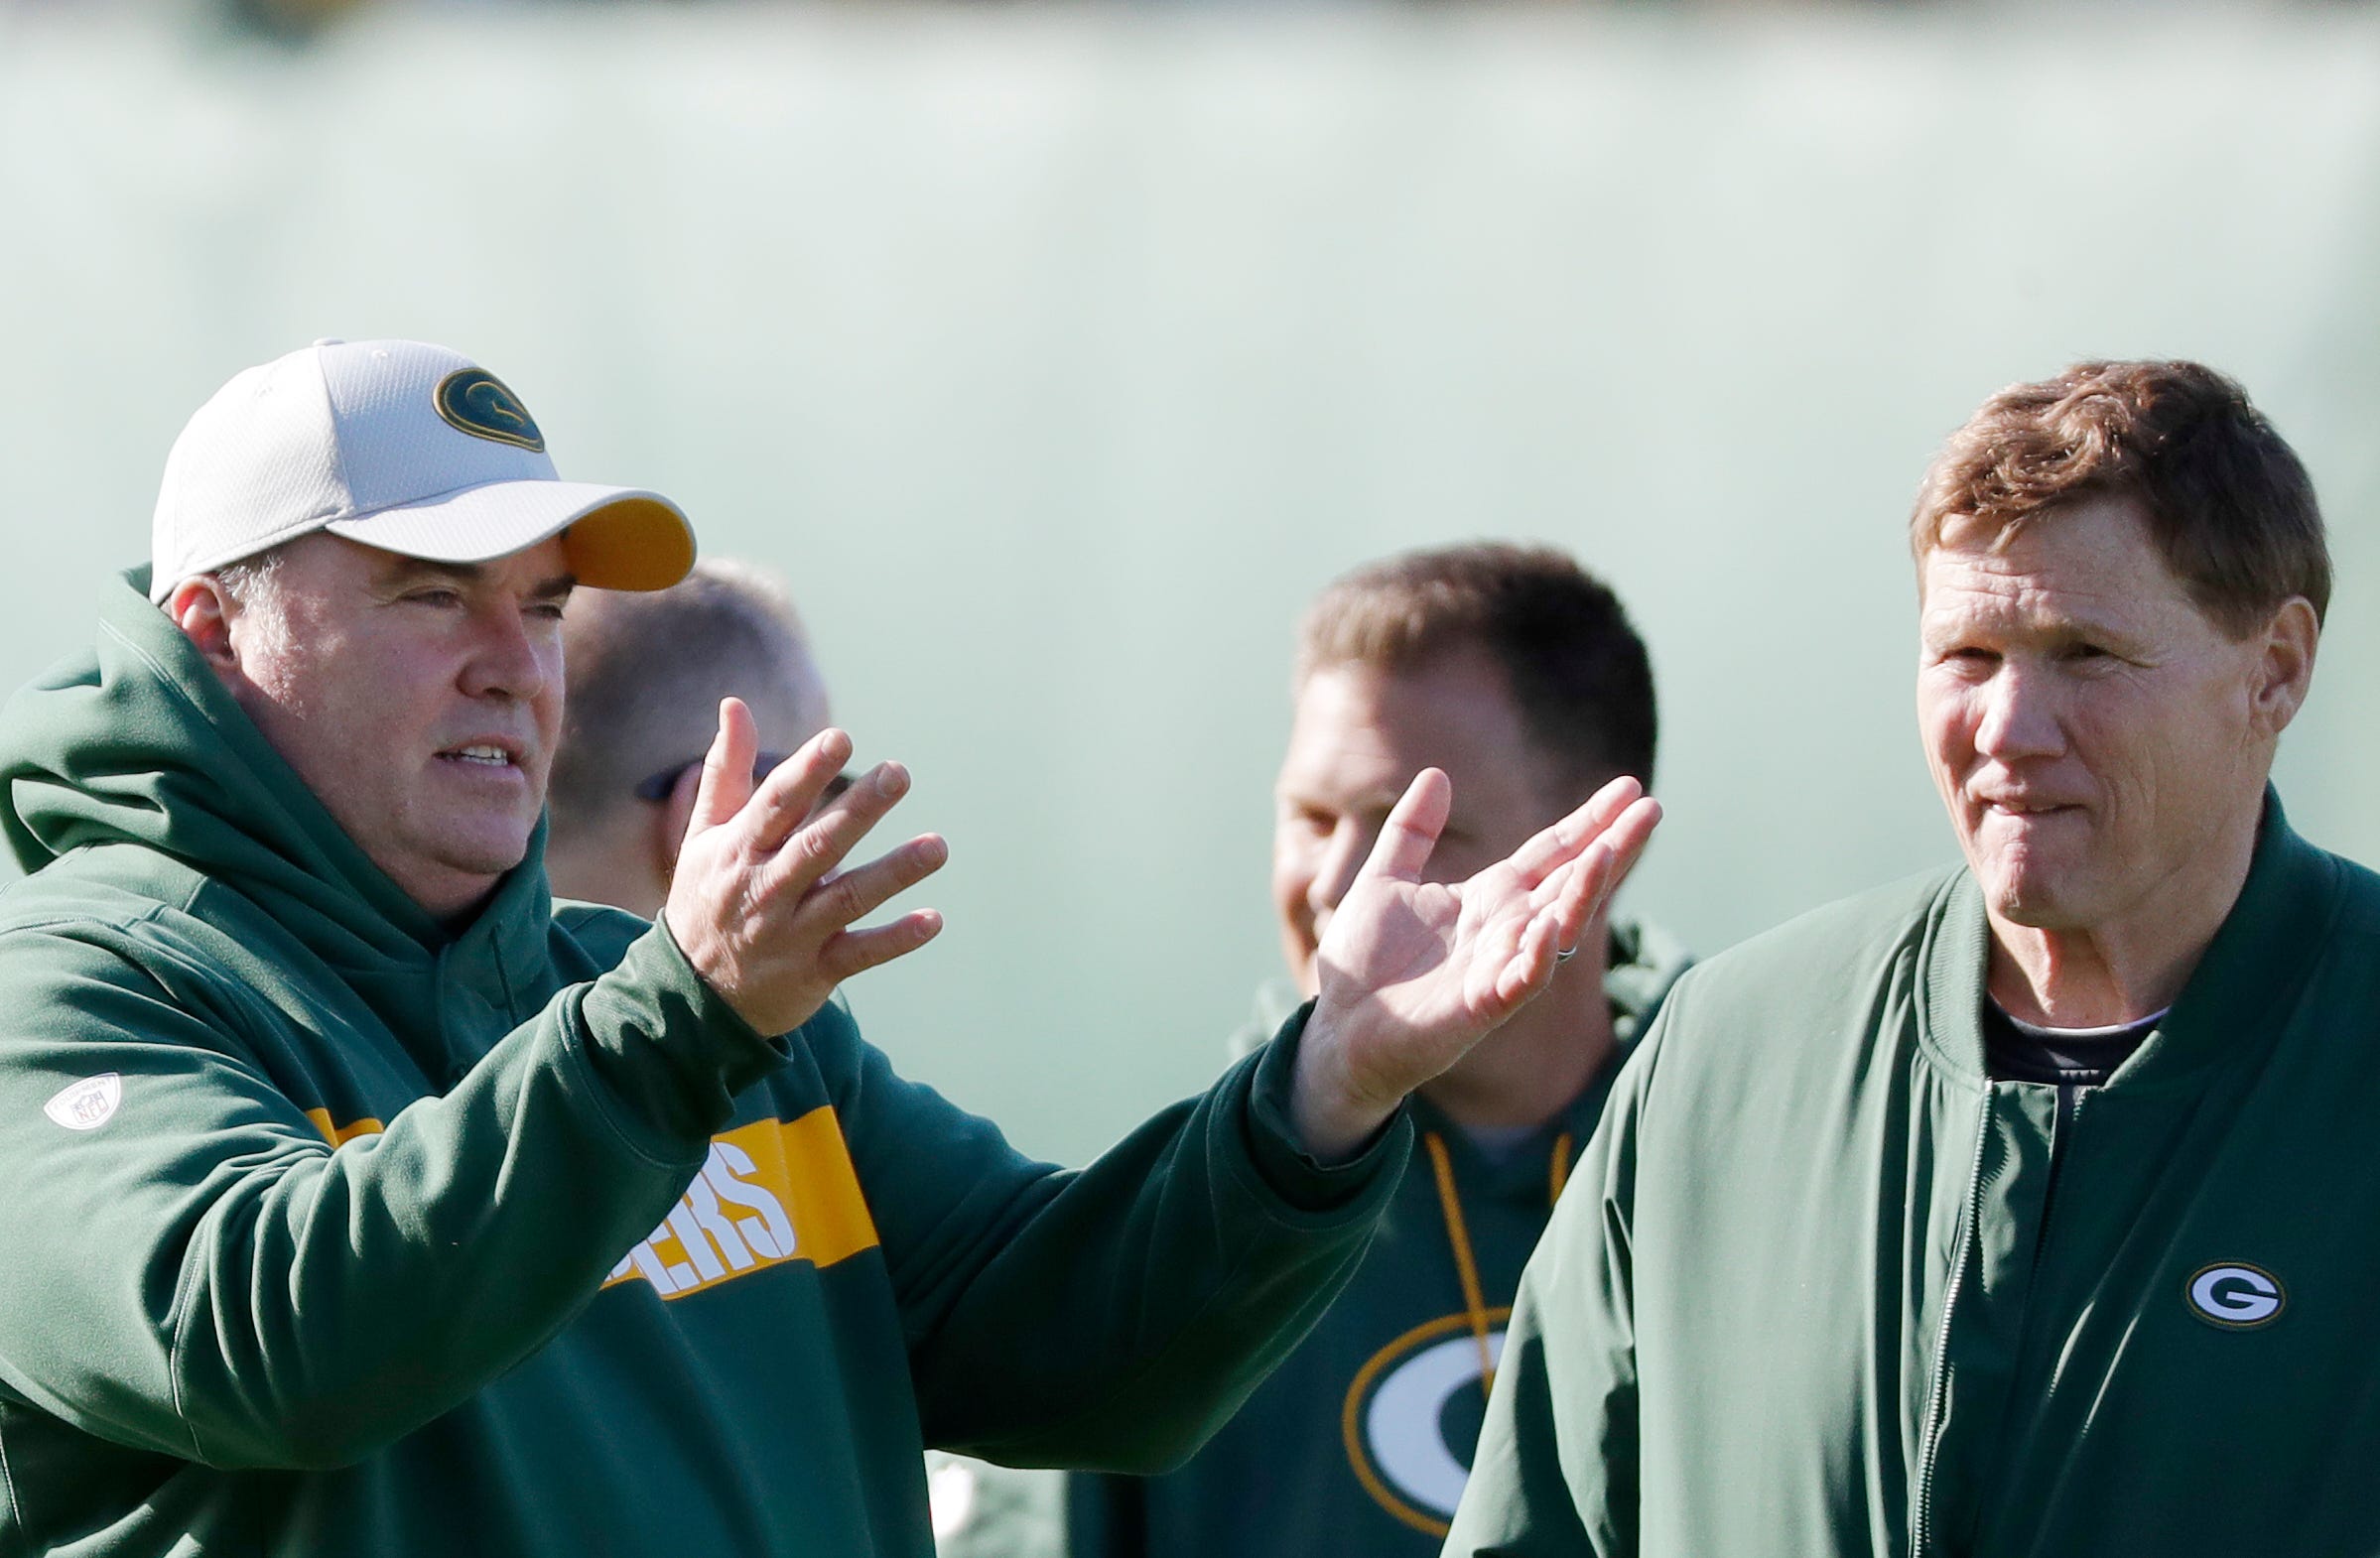 Green Bay Packers head coach Mike McCarthy talks to CEO Mark Murphy during practice at Ray Nitschke Field on Wednesday, October 31, 2018 in Ashwaubenon, Wis.